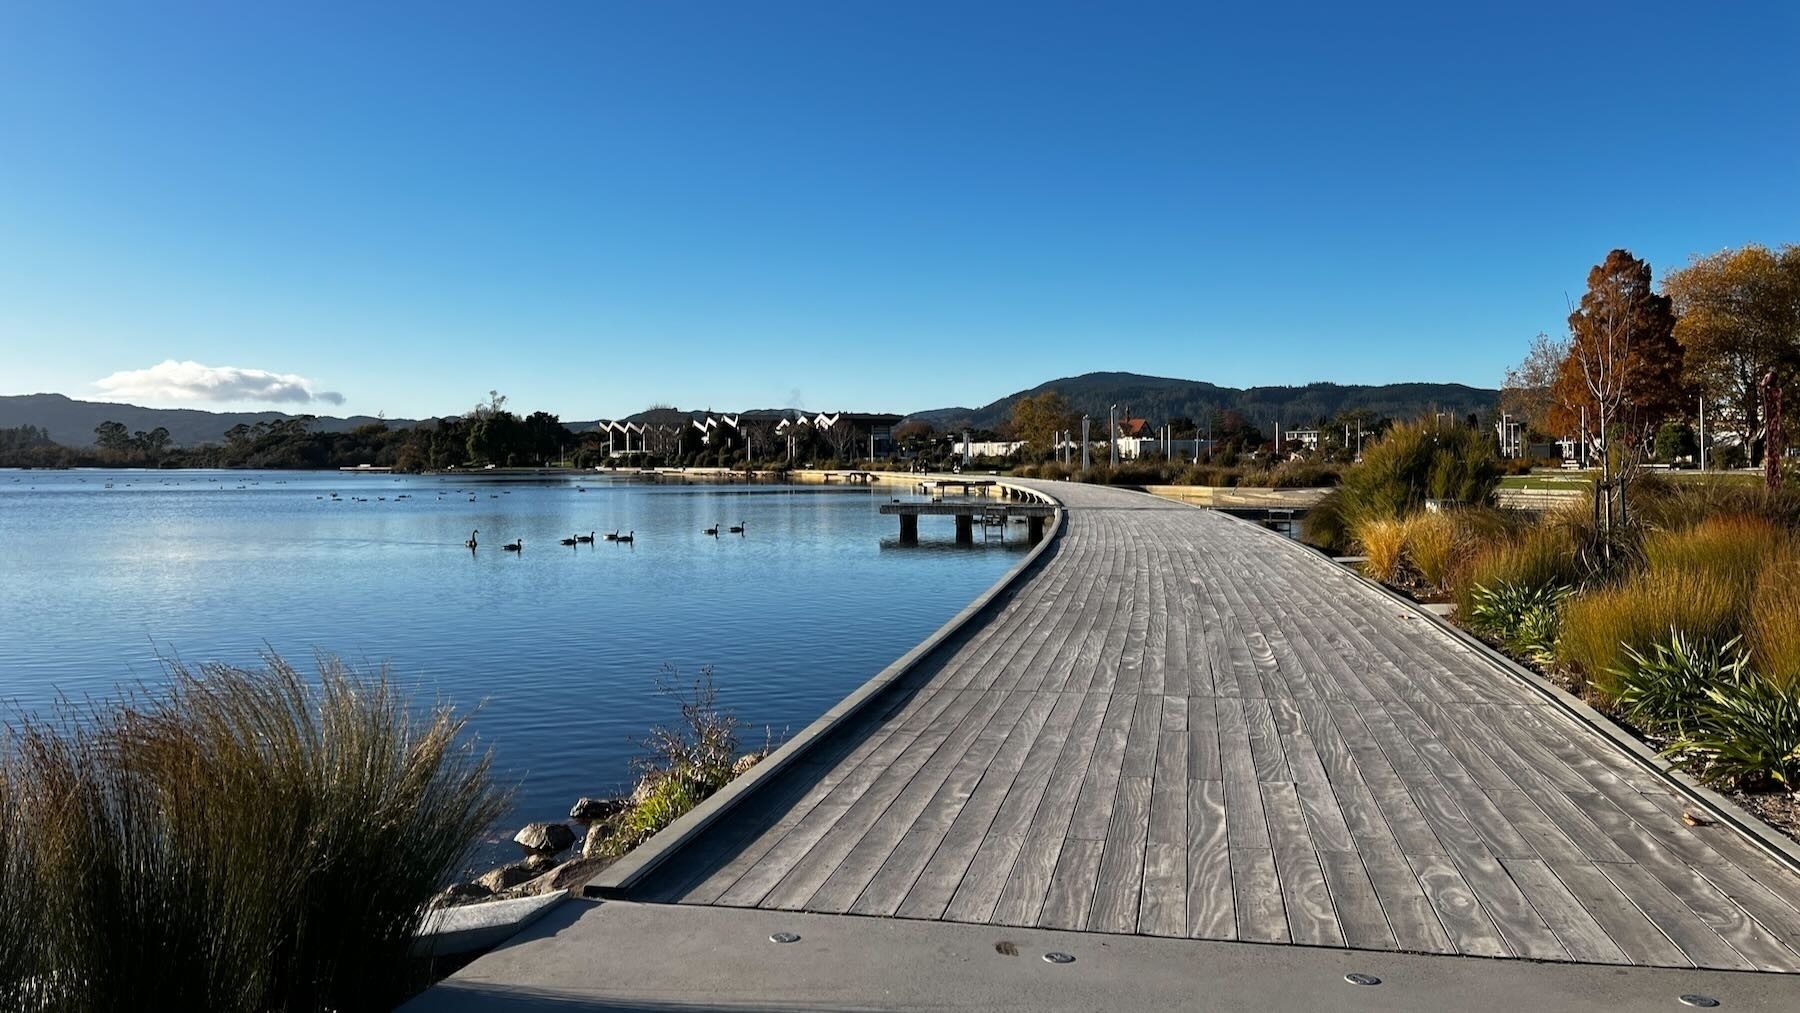 A wooden walkway over the lake, with geese and swans visible, native plants, blue sky. 